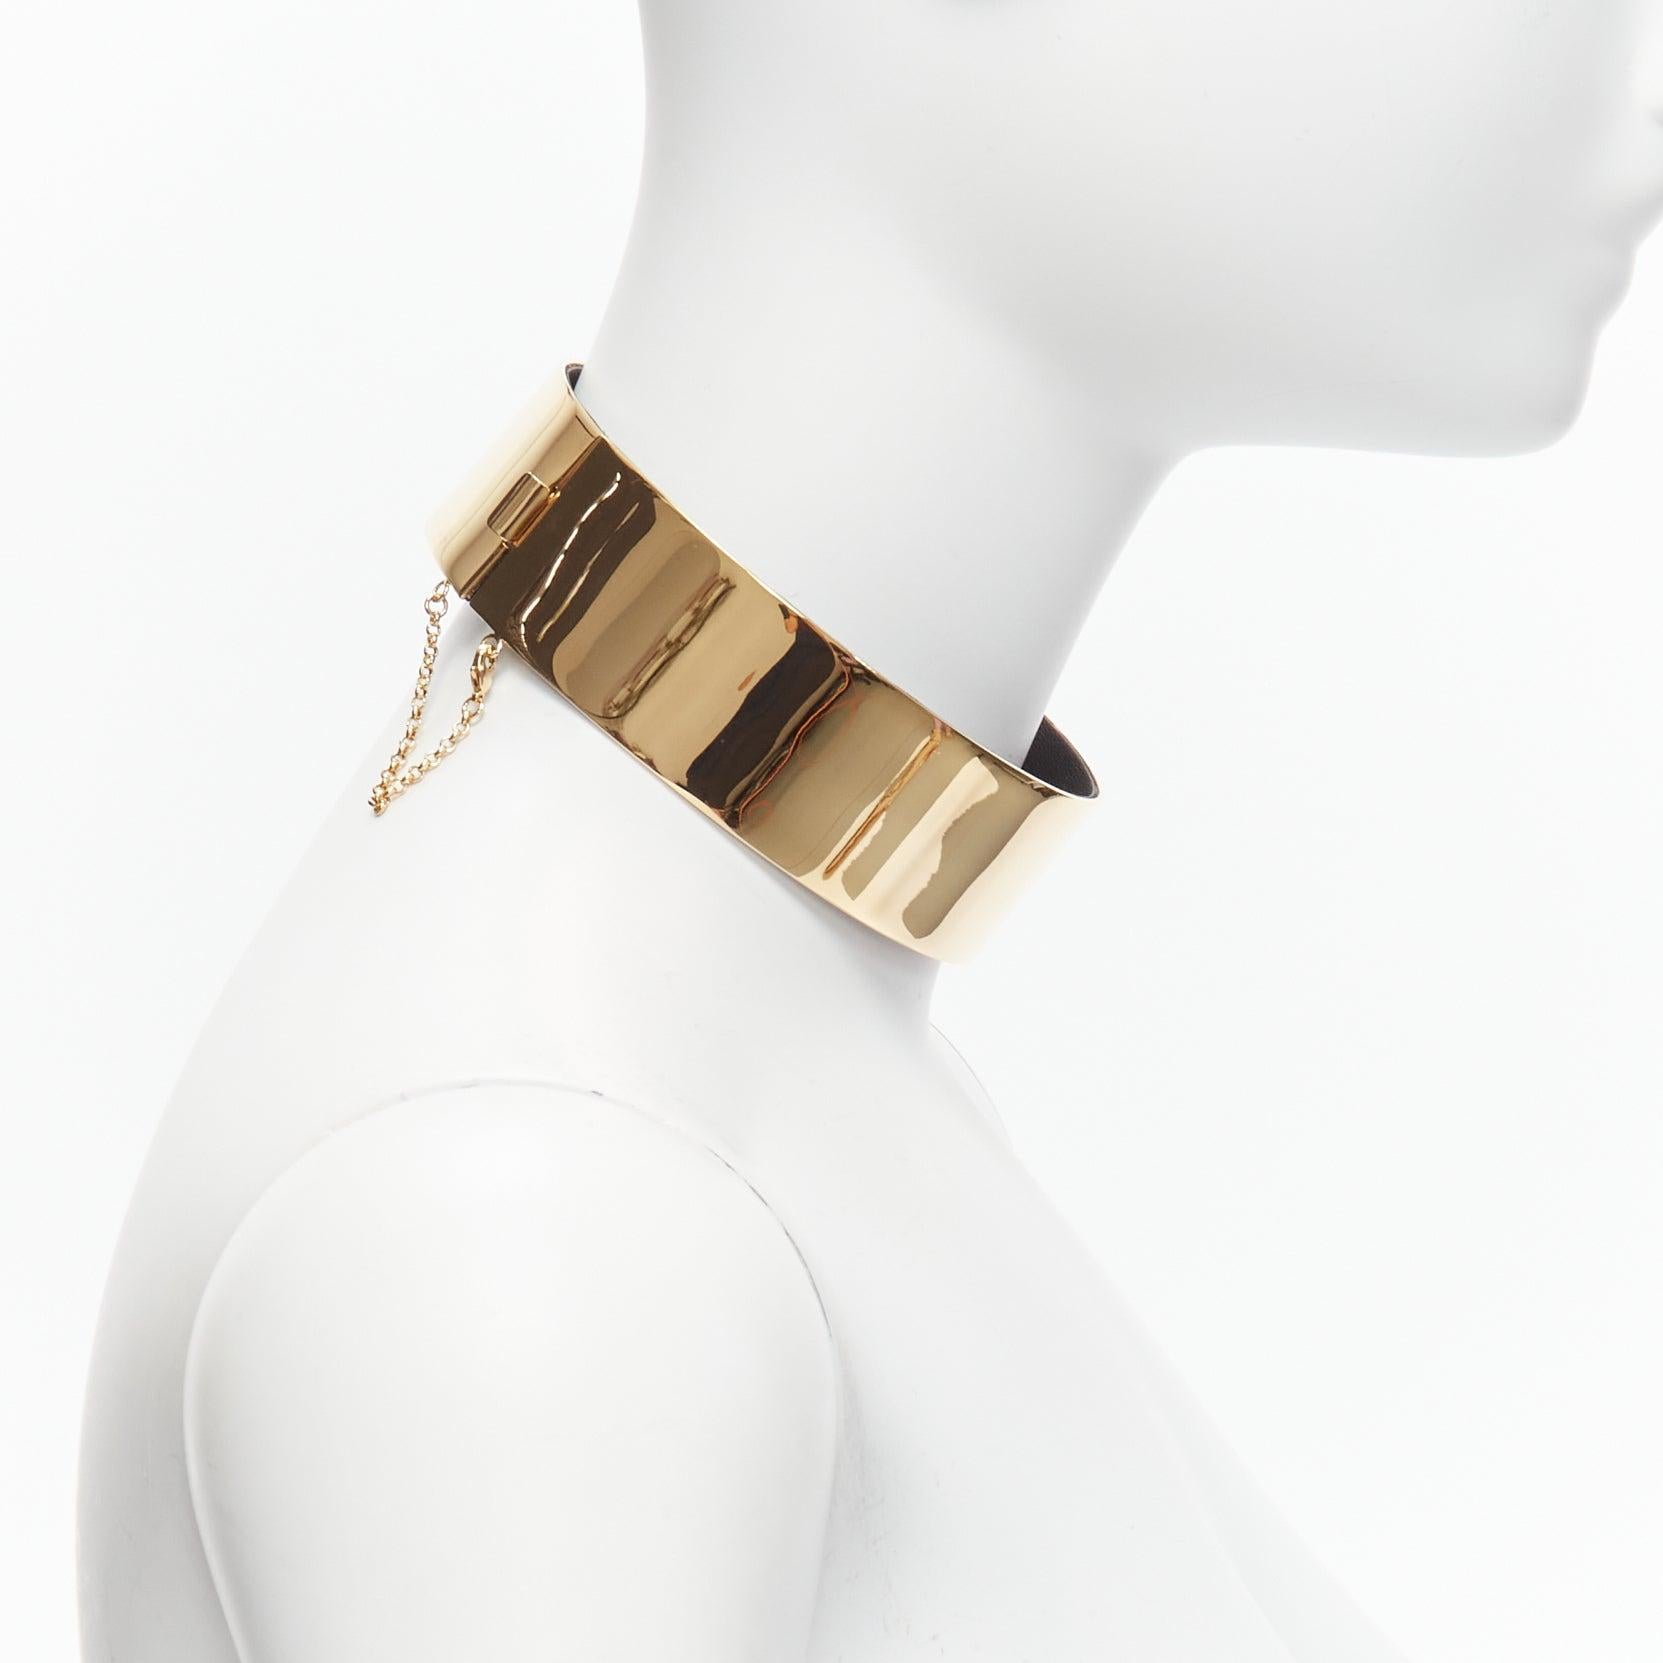 OLD CELINE Phoebe Philo 2011 Runway leather lined metal bar choker necklace In Good Condition For Sale In Hong Kong, NT